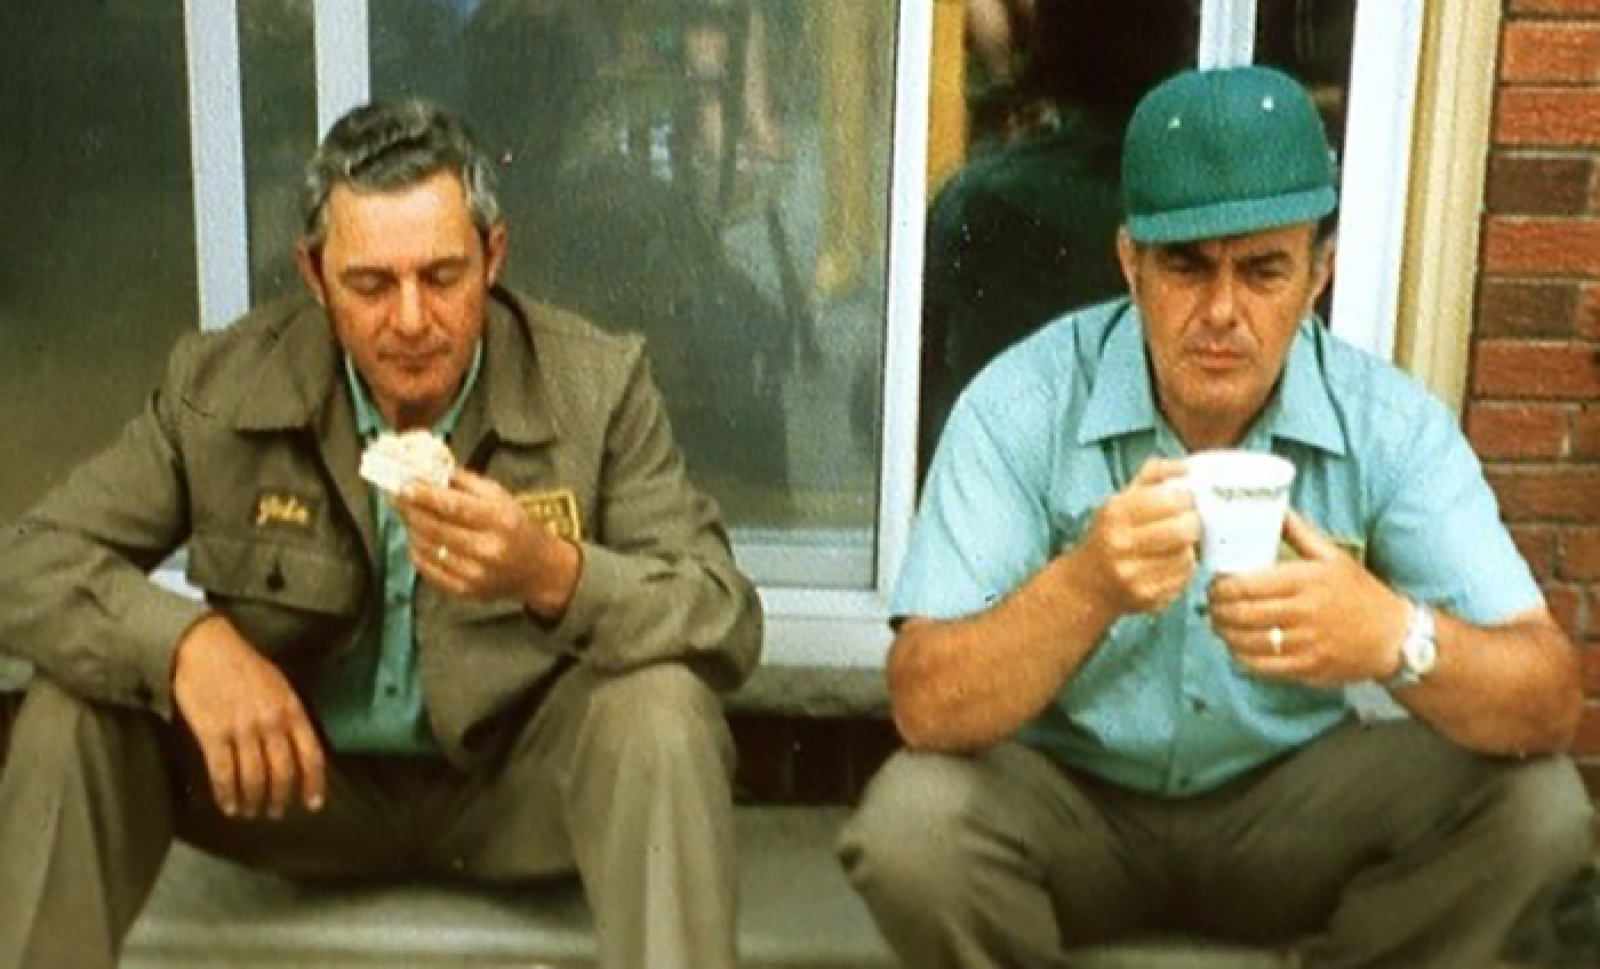 John, left, and David Bakker take a coffee break sometime in early 1970s. John, who passed away in 2012, is wearing the uniform worn by employees at the time. 